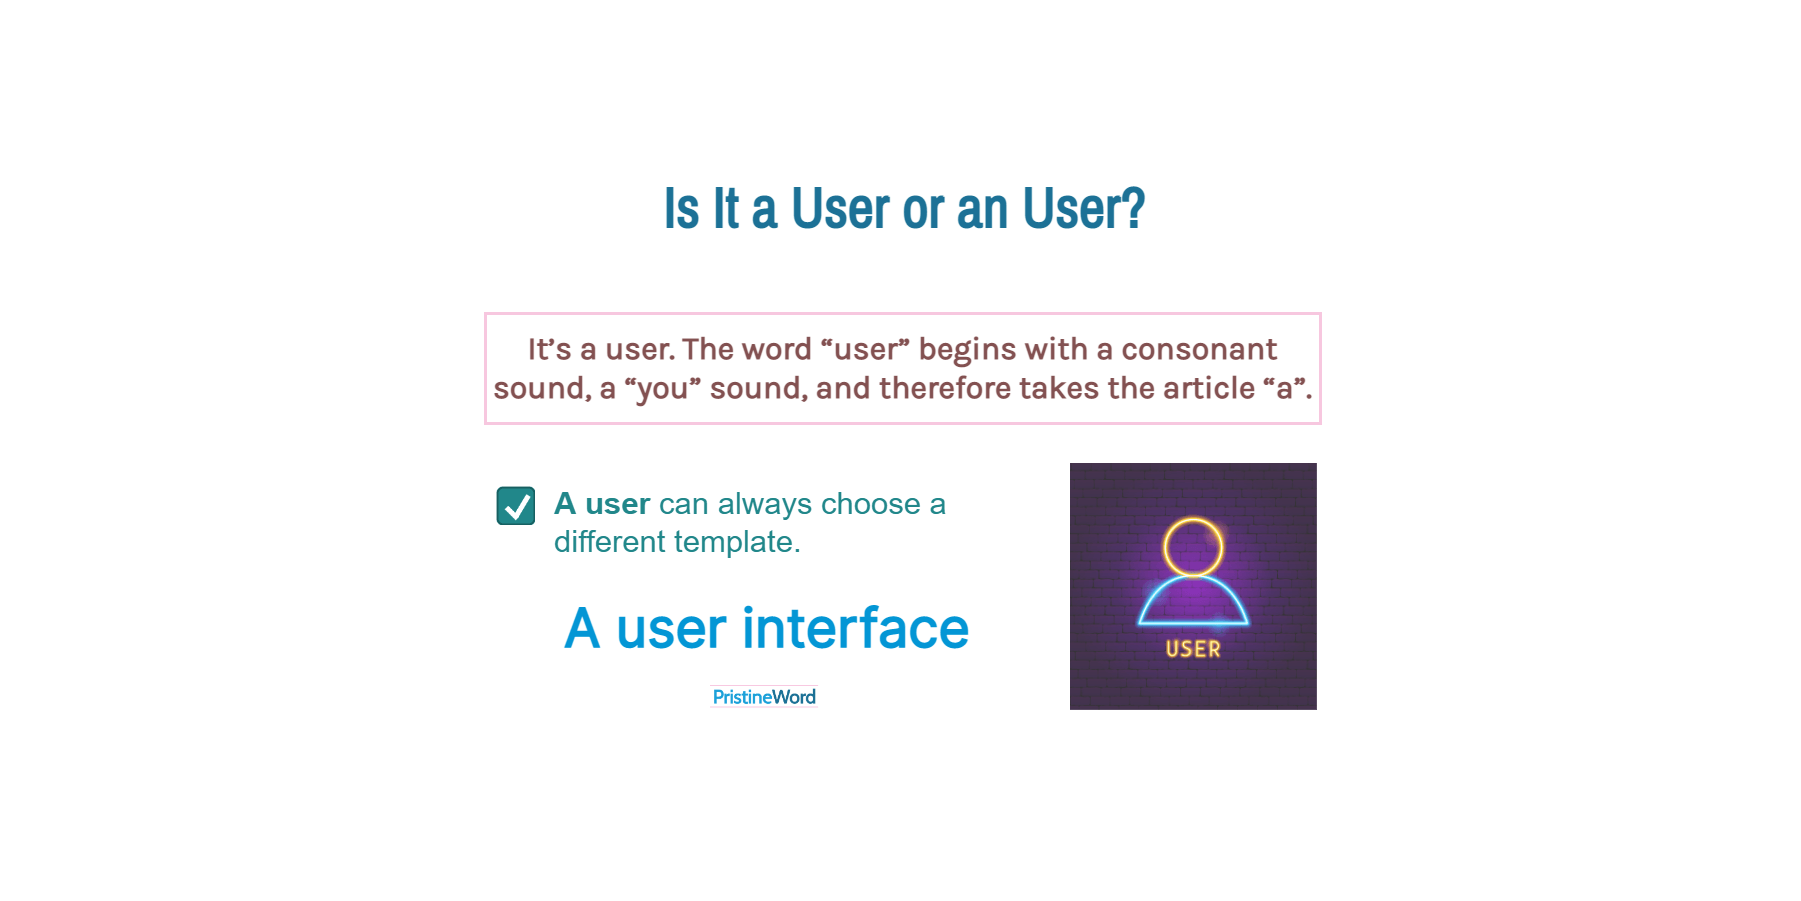 Is It a User or an User?